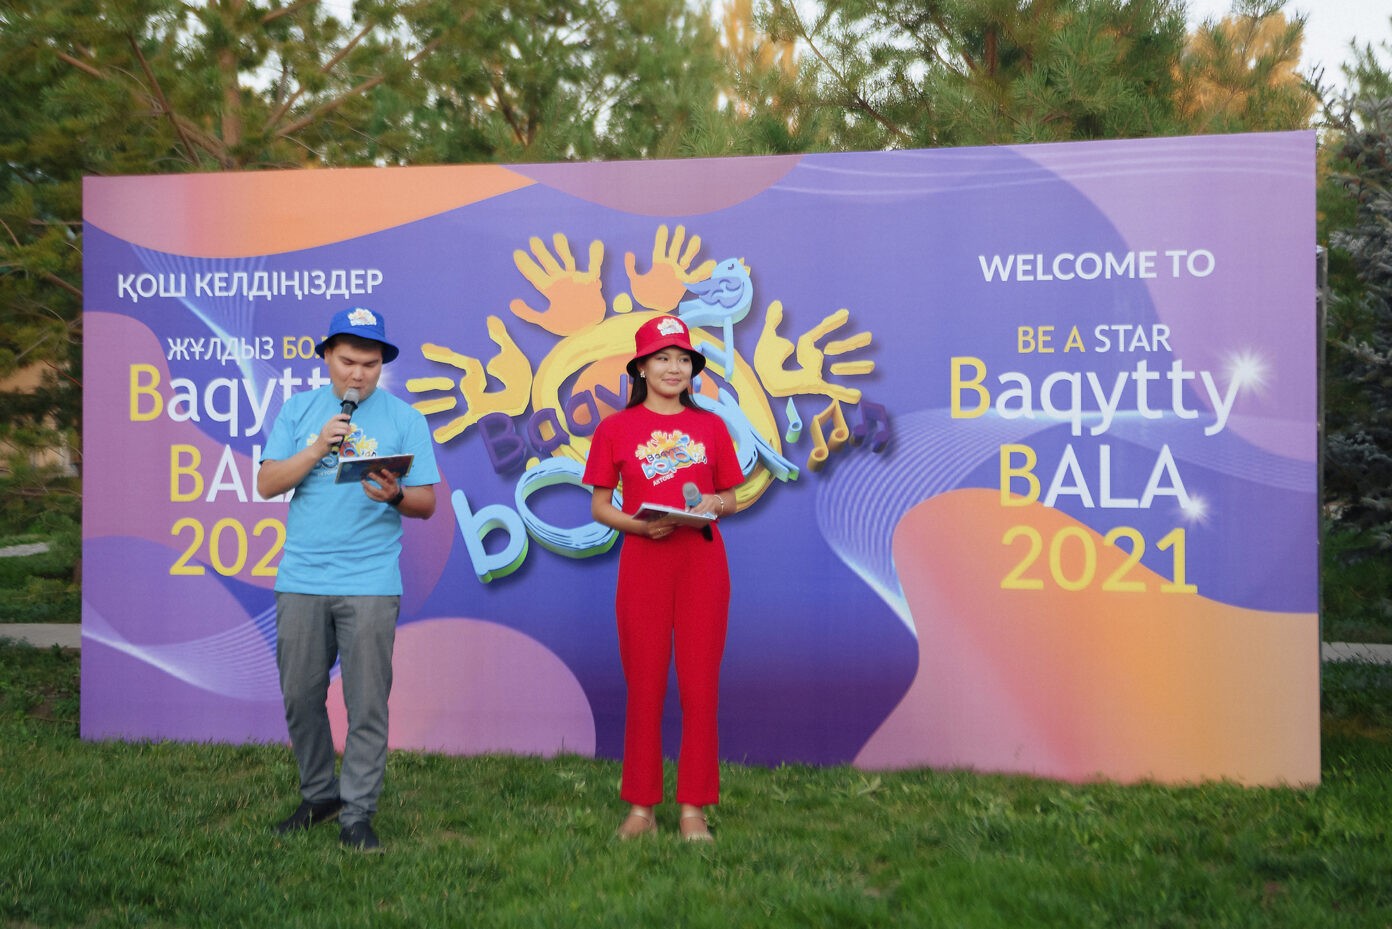 “Kazakh hospitality is amazing”: how the participants of the Baqytty Bala contest were greeted